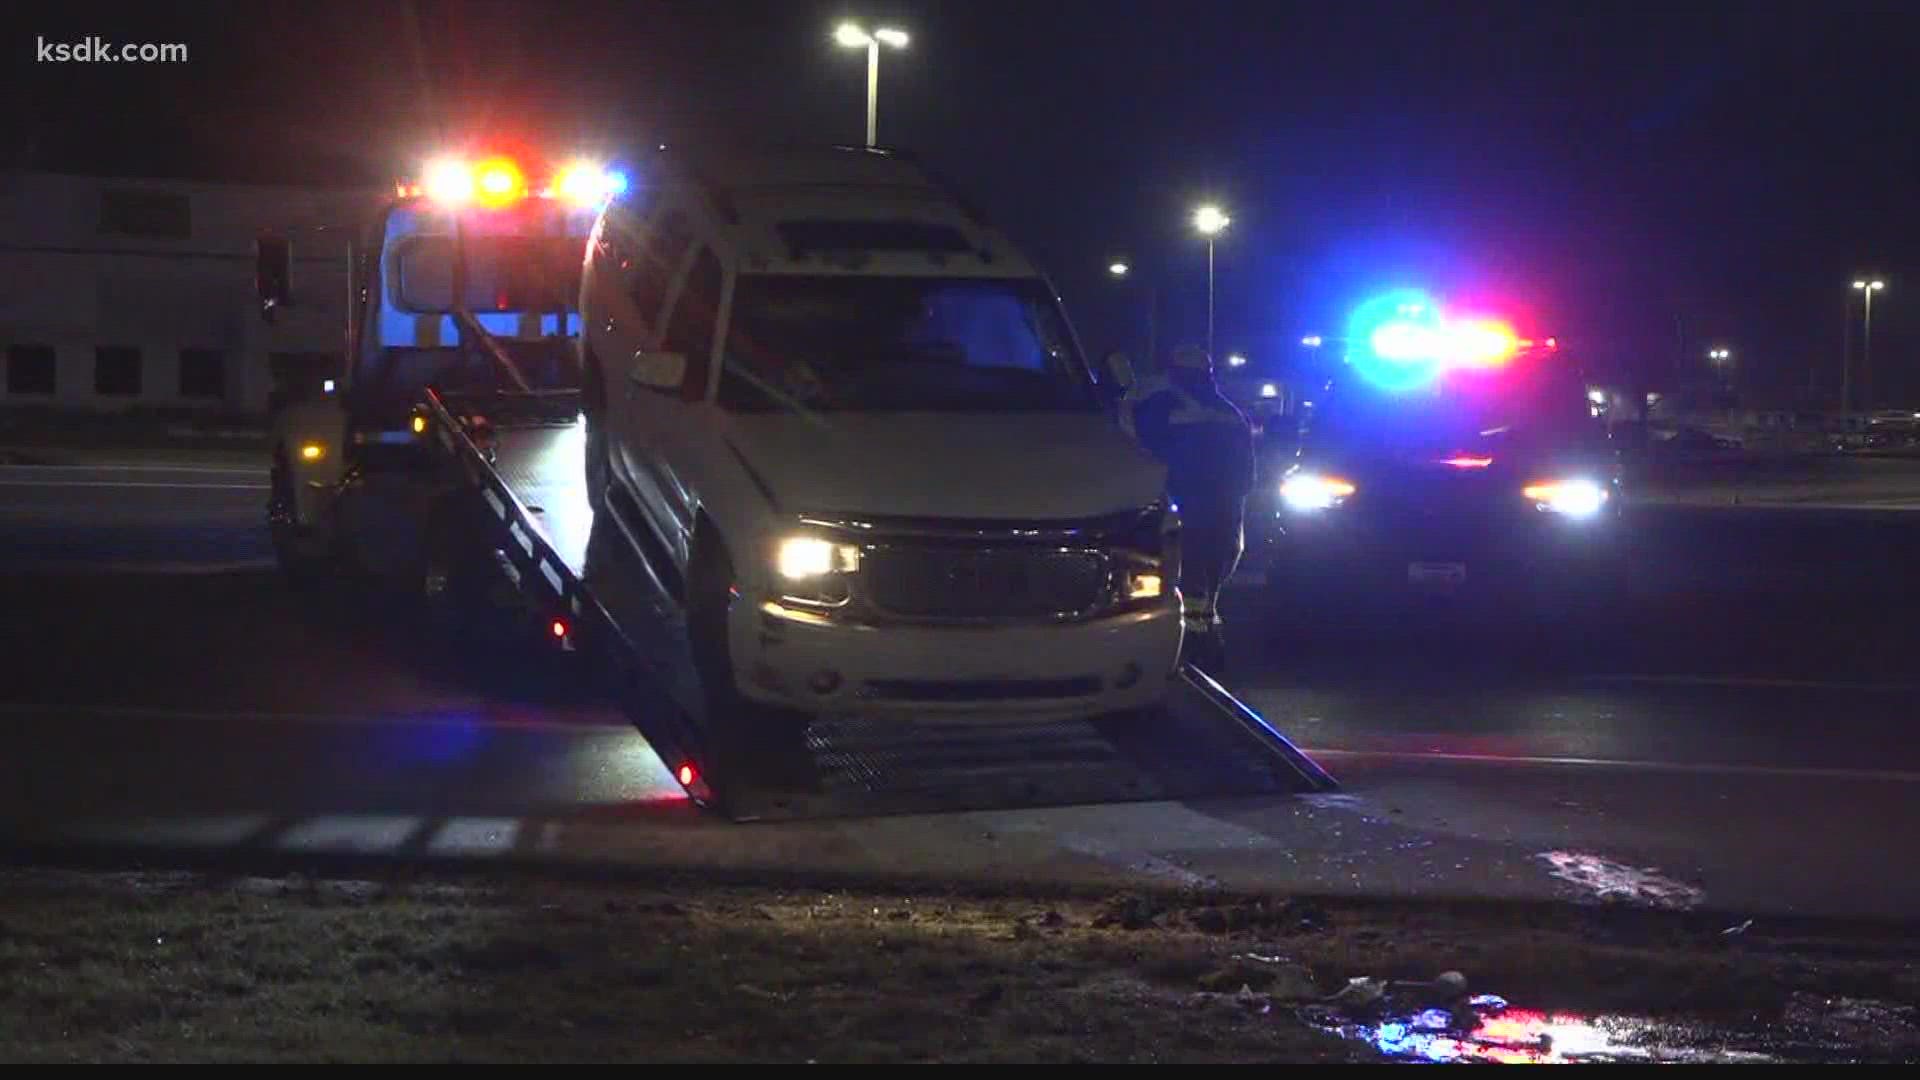 A St. Charles County sheriff’s deputy was seriously injured after being hit by a car during a traffic stop early Wednesday morning.